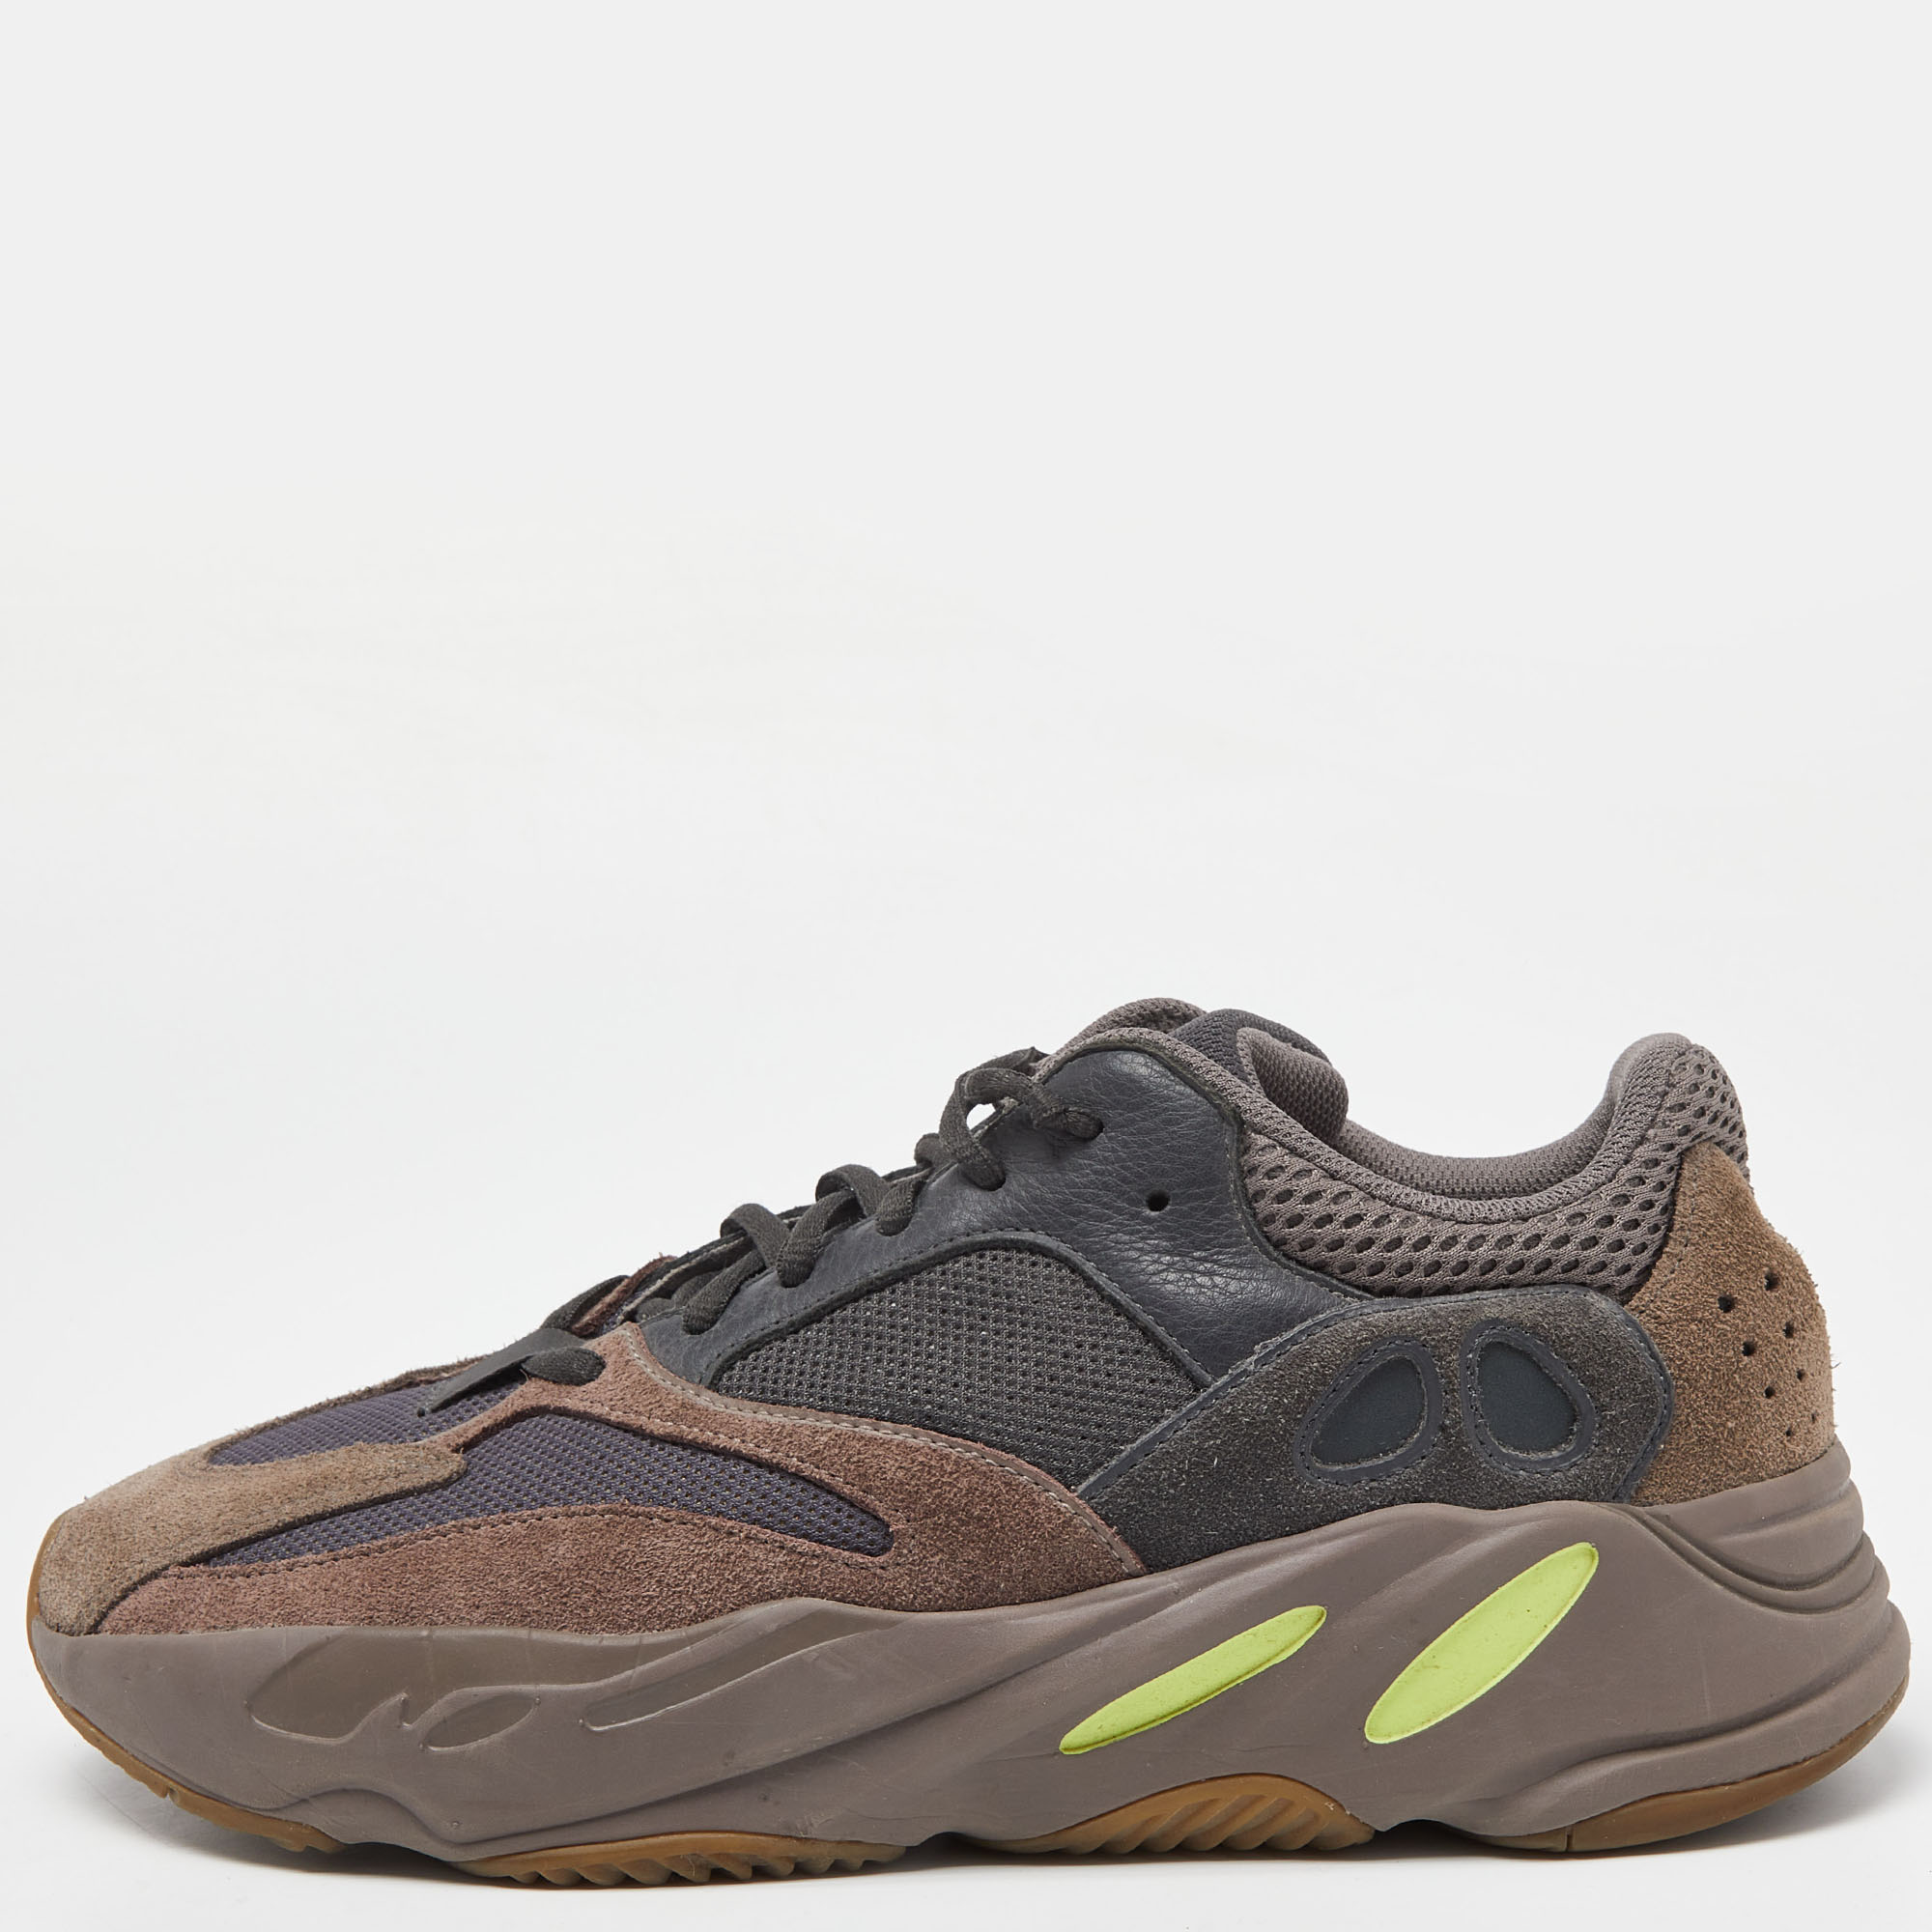 Coming in a classic silhouette these Yeezy x adidas sneakers are a seamless combination of luxury comfort and style. These sneakers are designed with signature details and comfortable insoles.